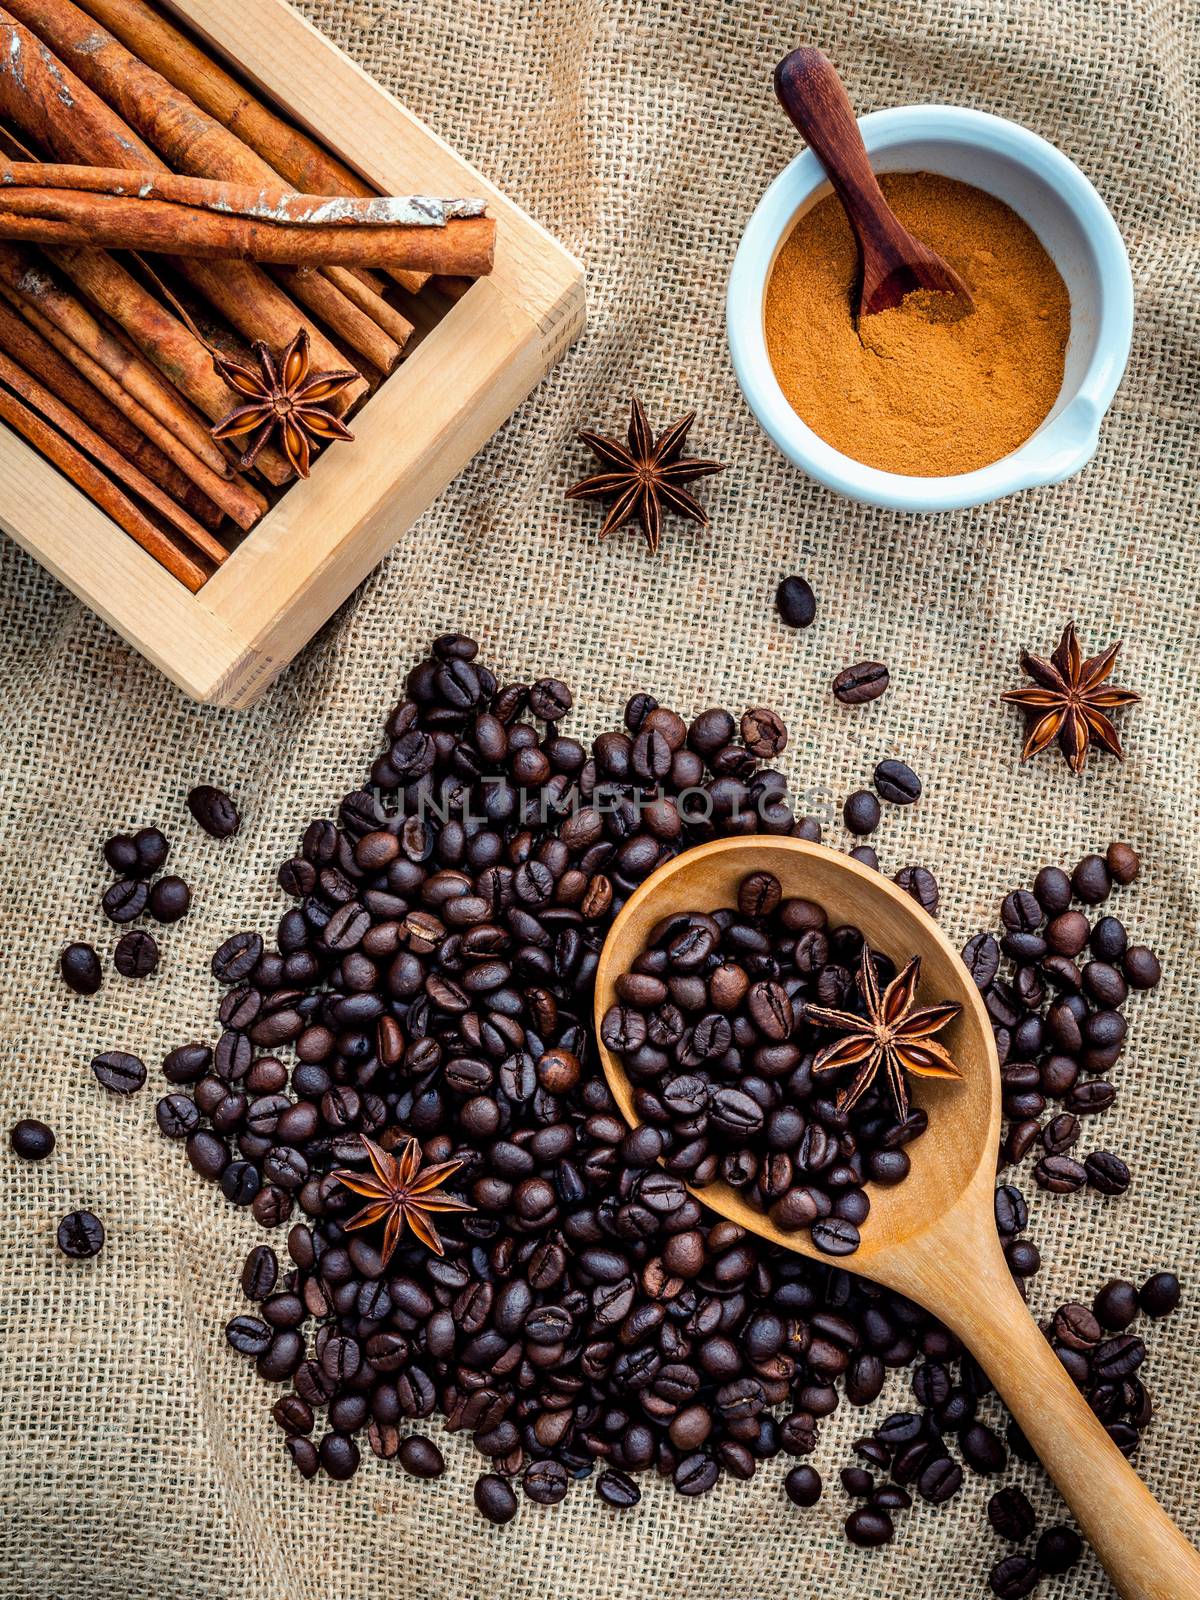 The Cup of coffee beans on the cloth sack with cinnamon sticks ,cinnamon powder in the bowl and star anise.